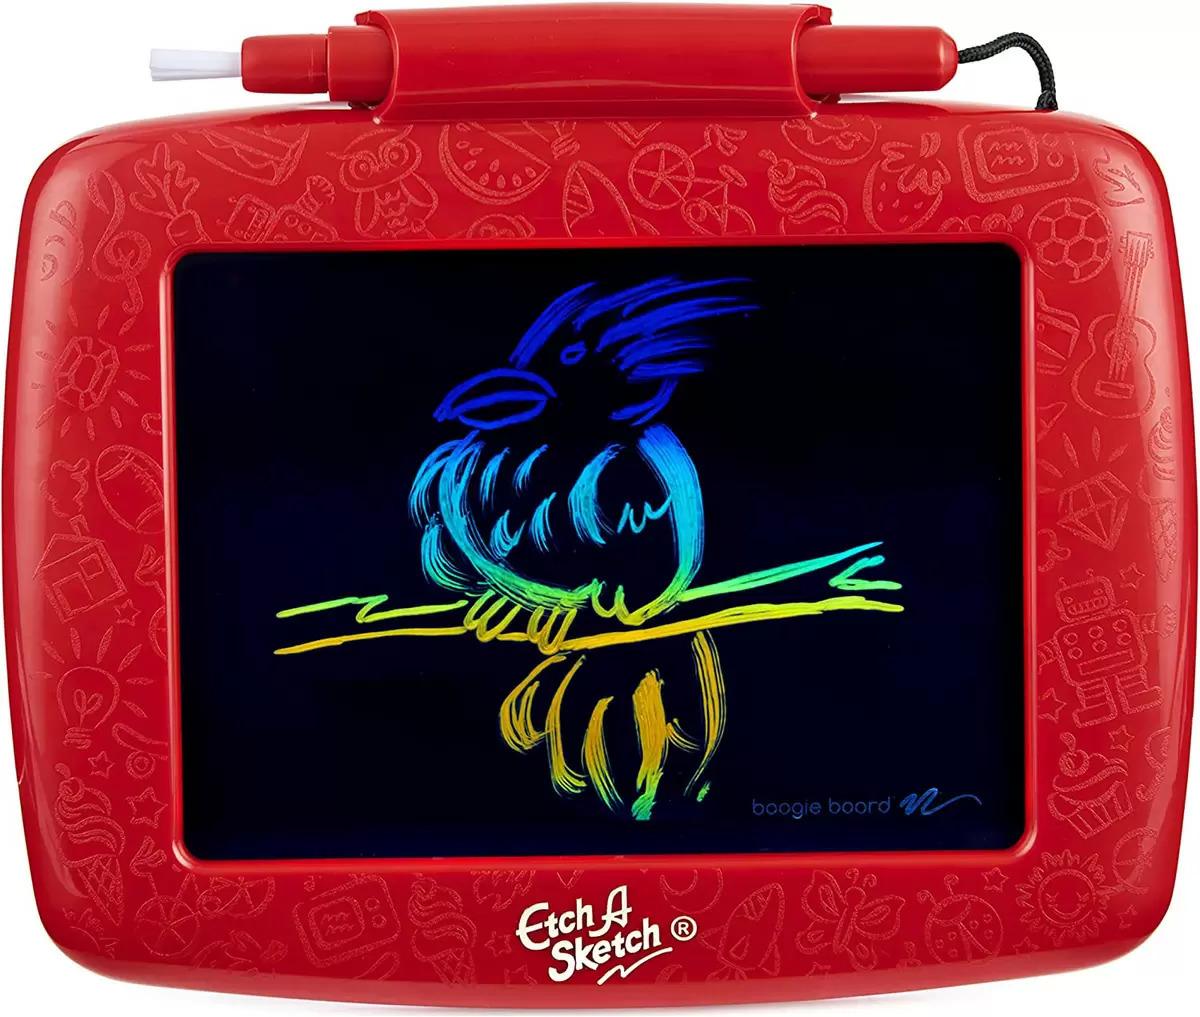 Etch A Sketch Freestyle Drawing Tablet for $8.79